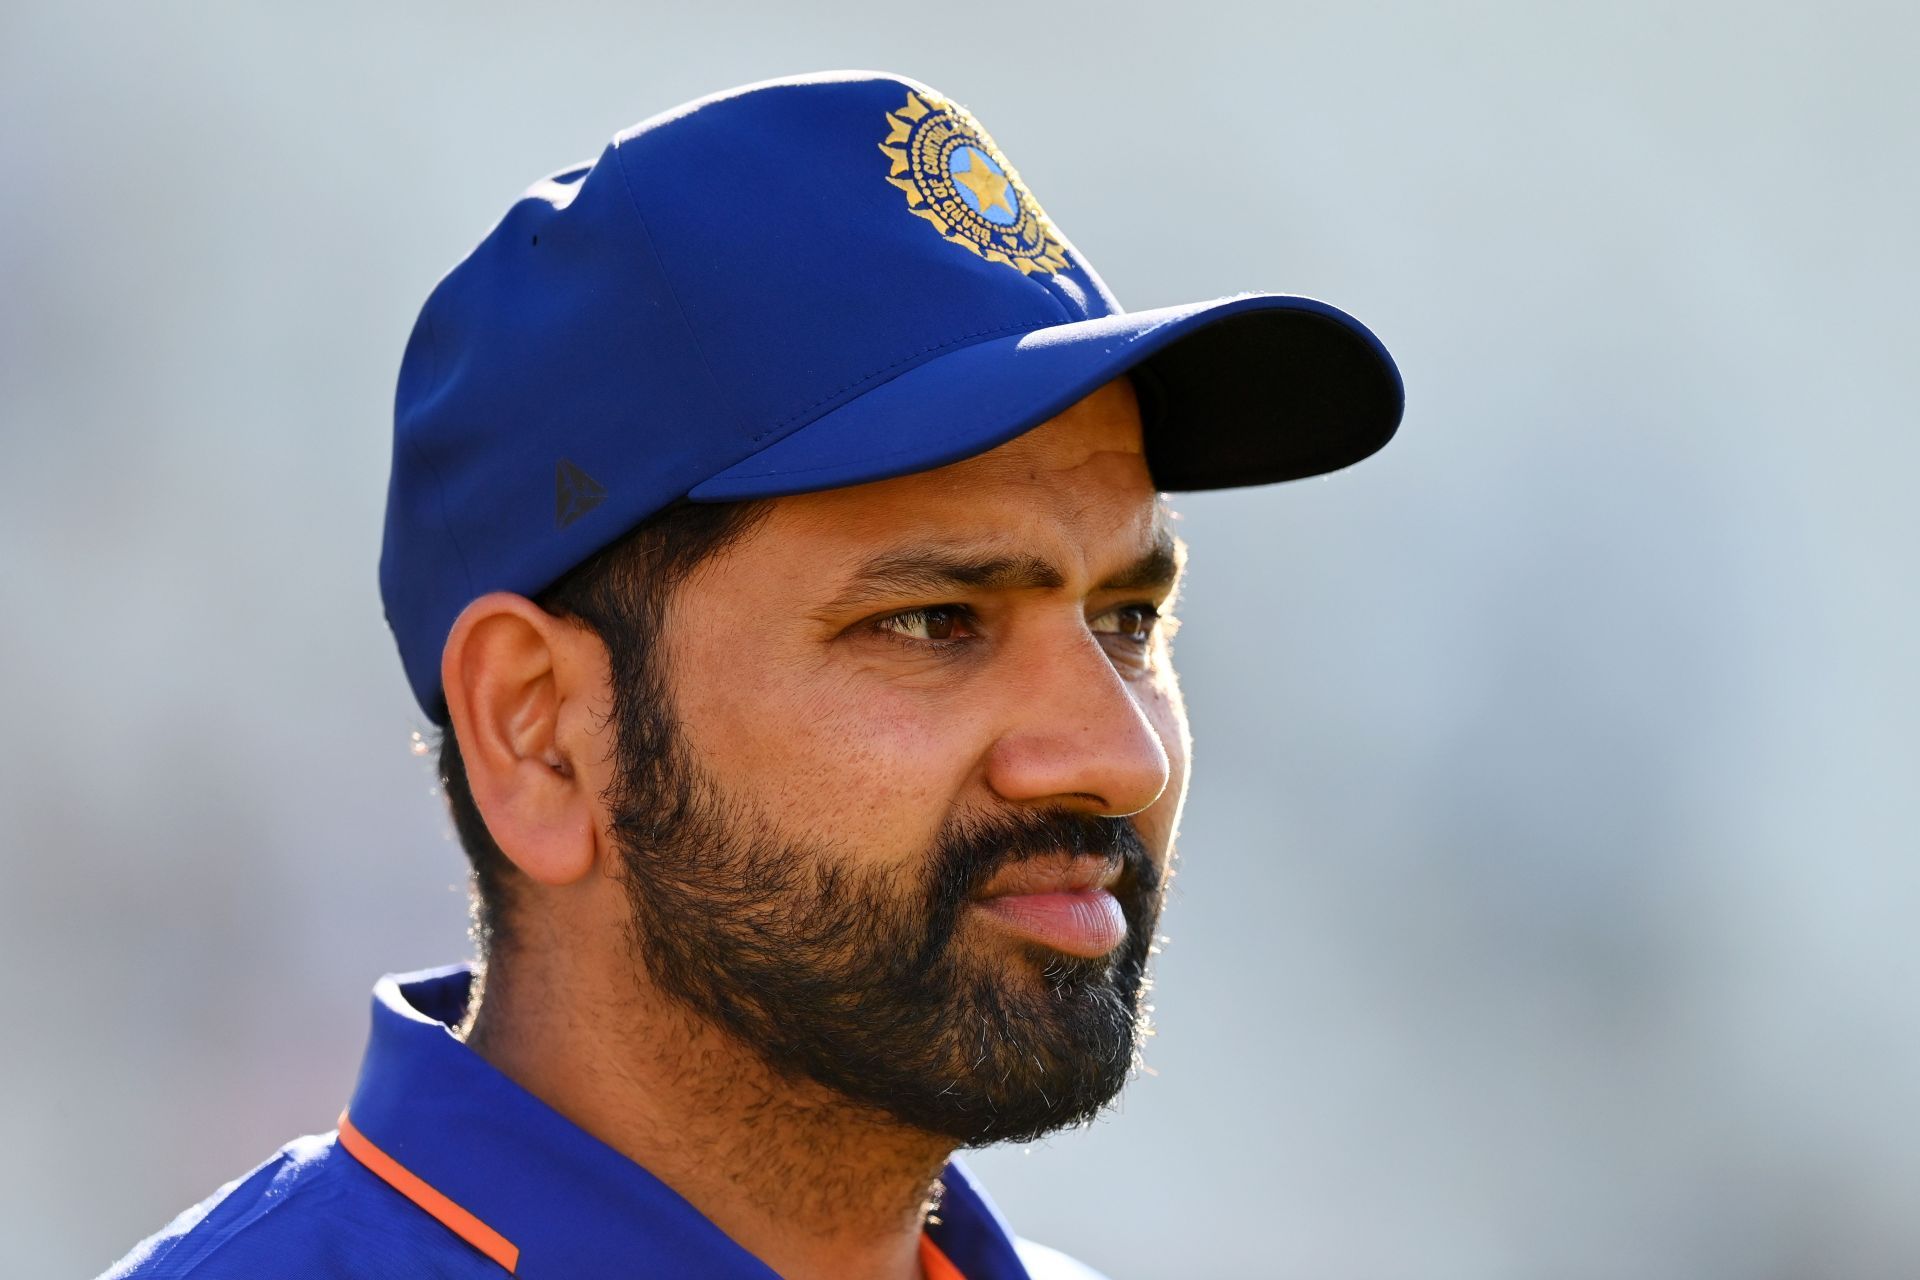 Rohit Sharma suffered a back spasm during the third T20I against West Indies.